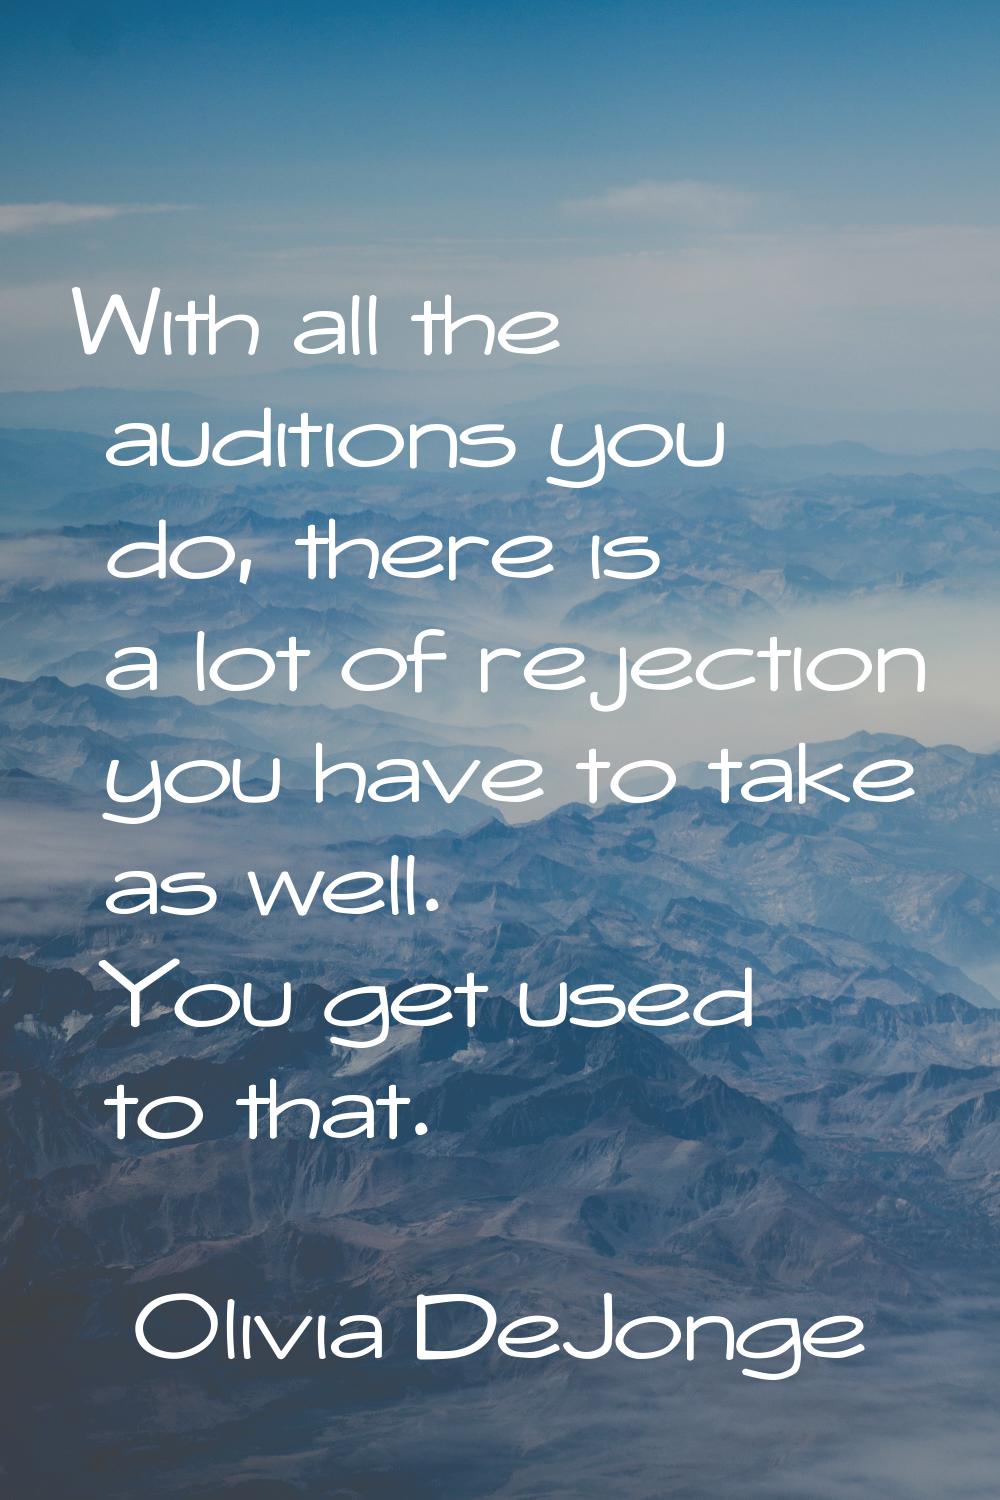 With all the auditions you do, there is a lot of rejection you have to take as well. You get used t